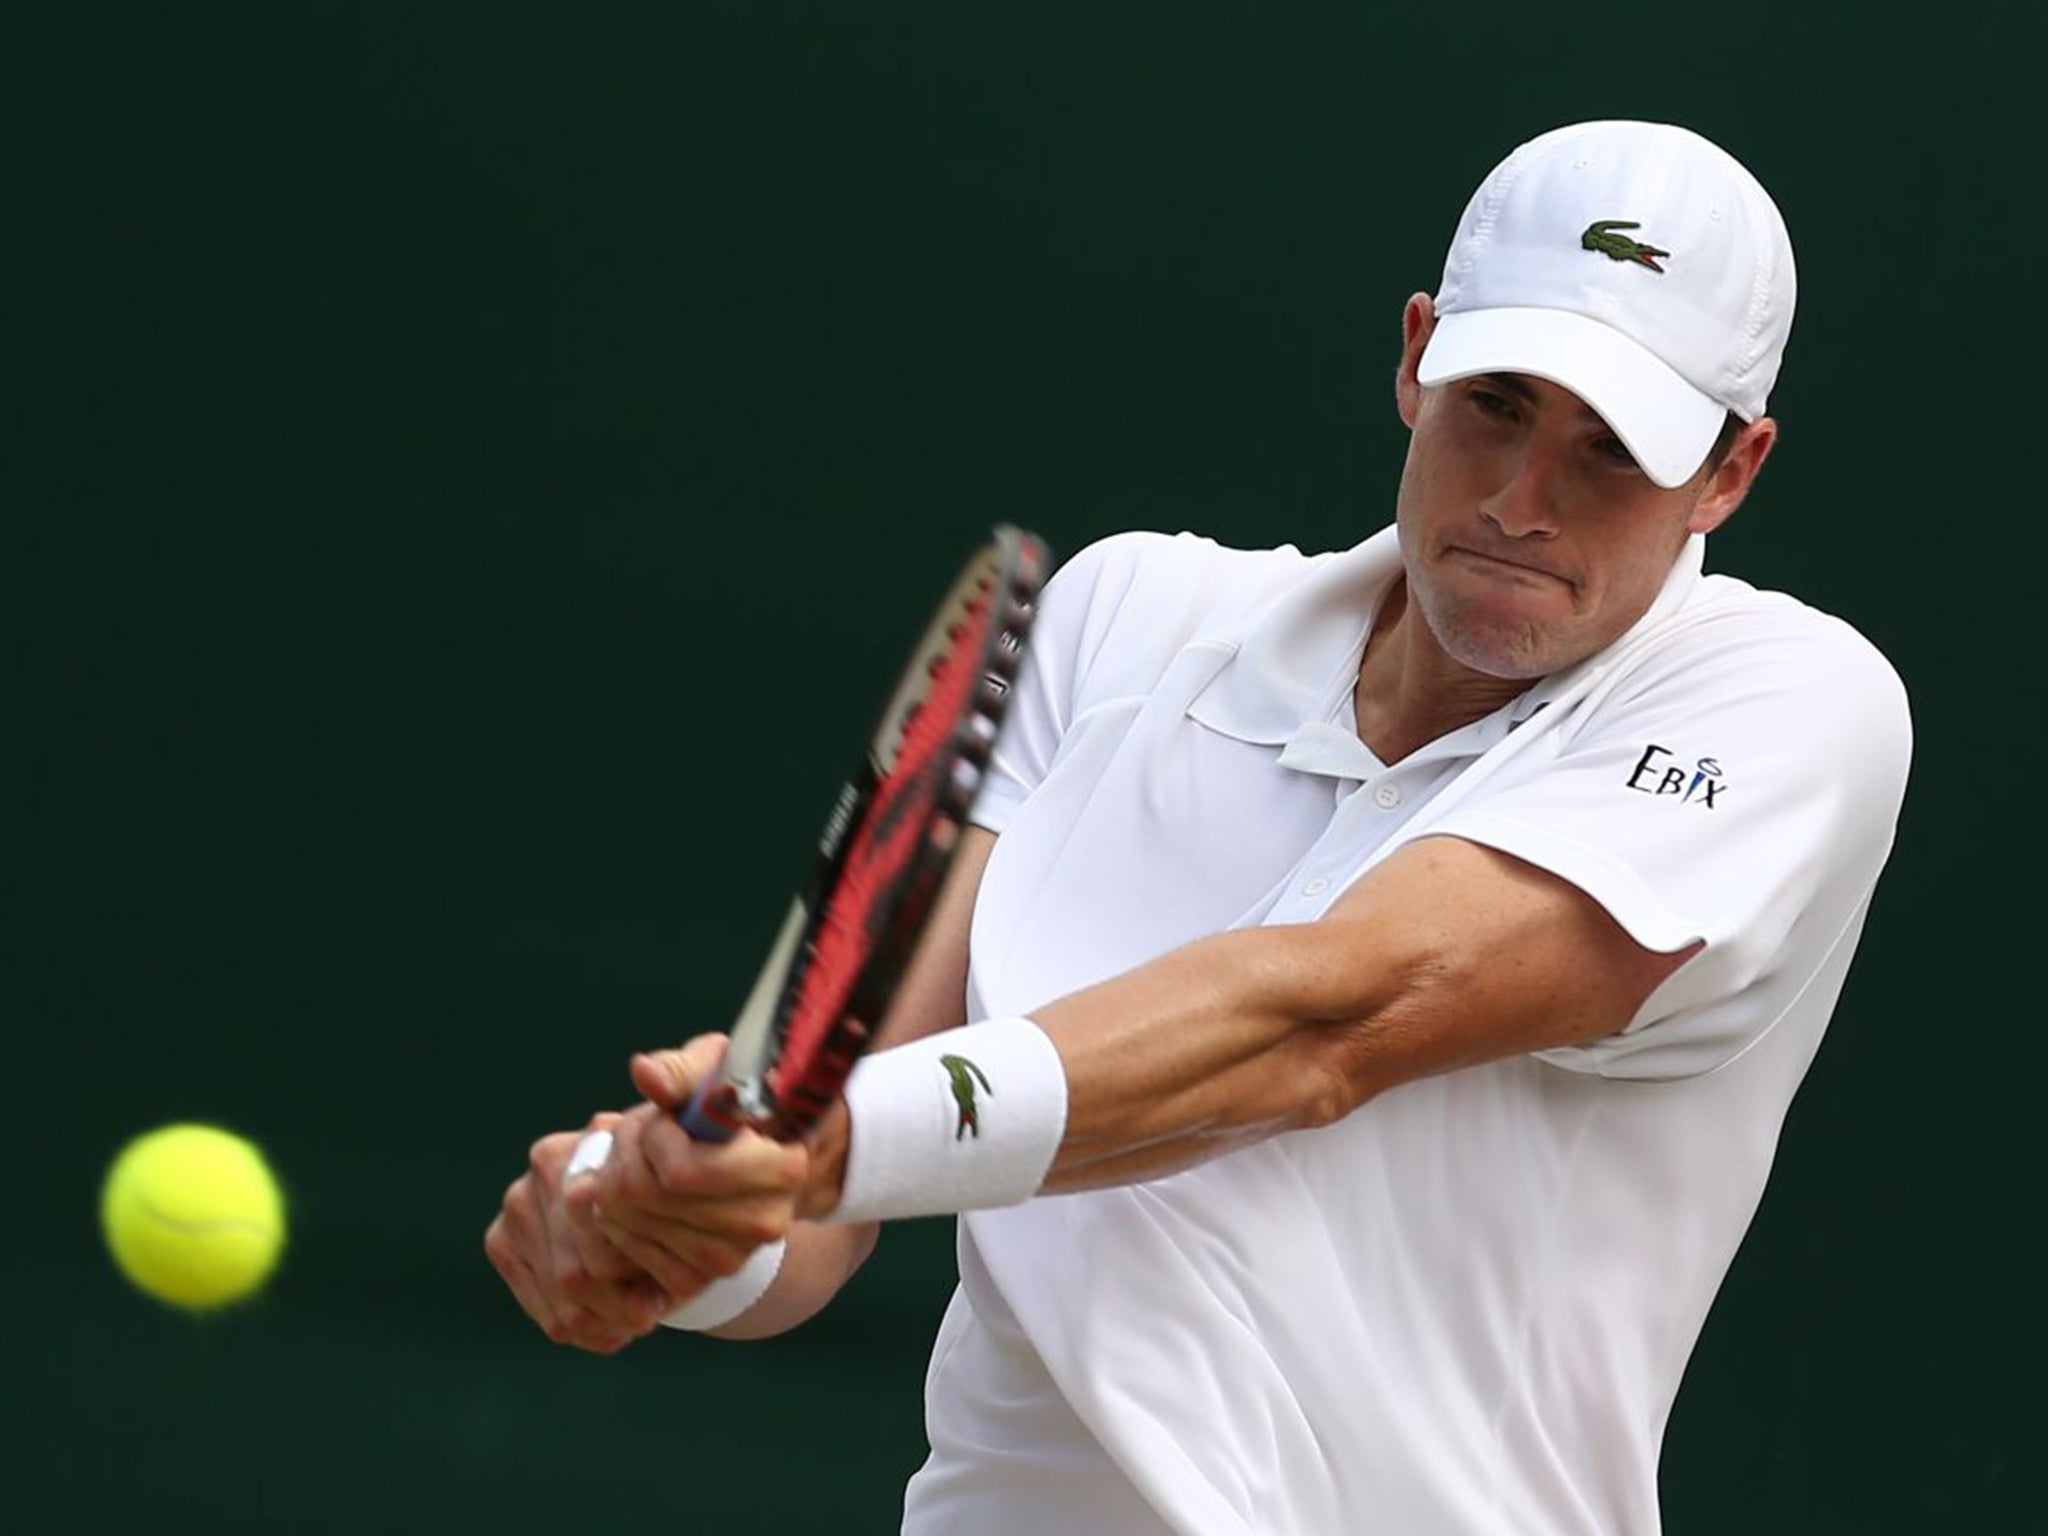 John Isner, of the United States, is attempting to reach the fourth round at Wimbledon for the first time